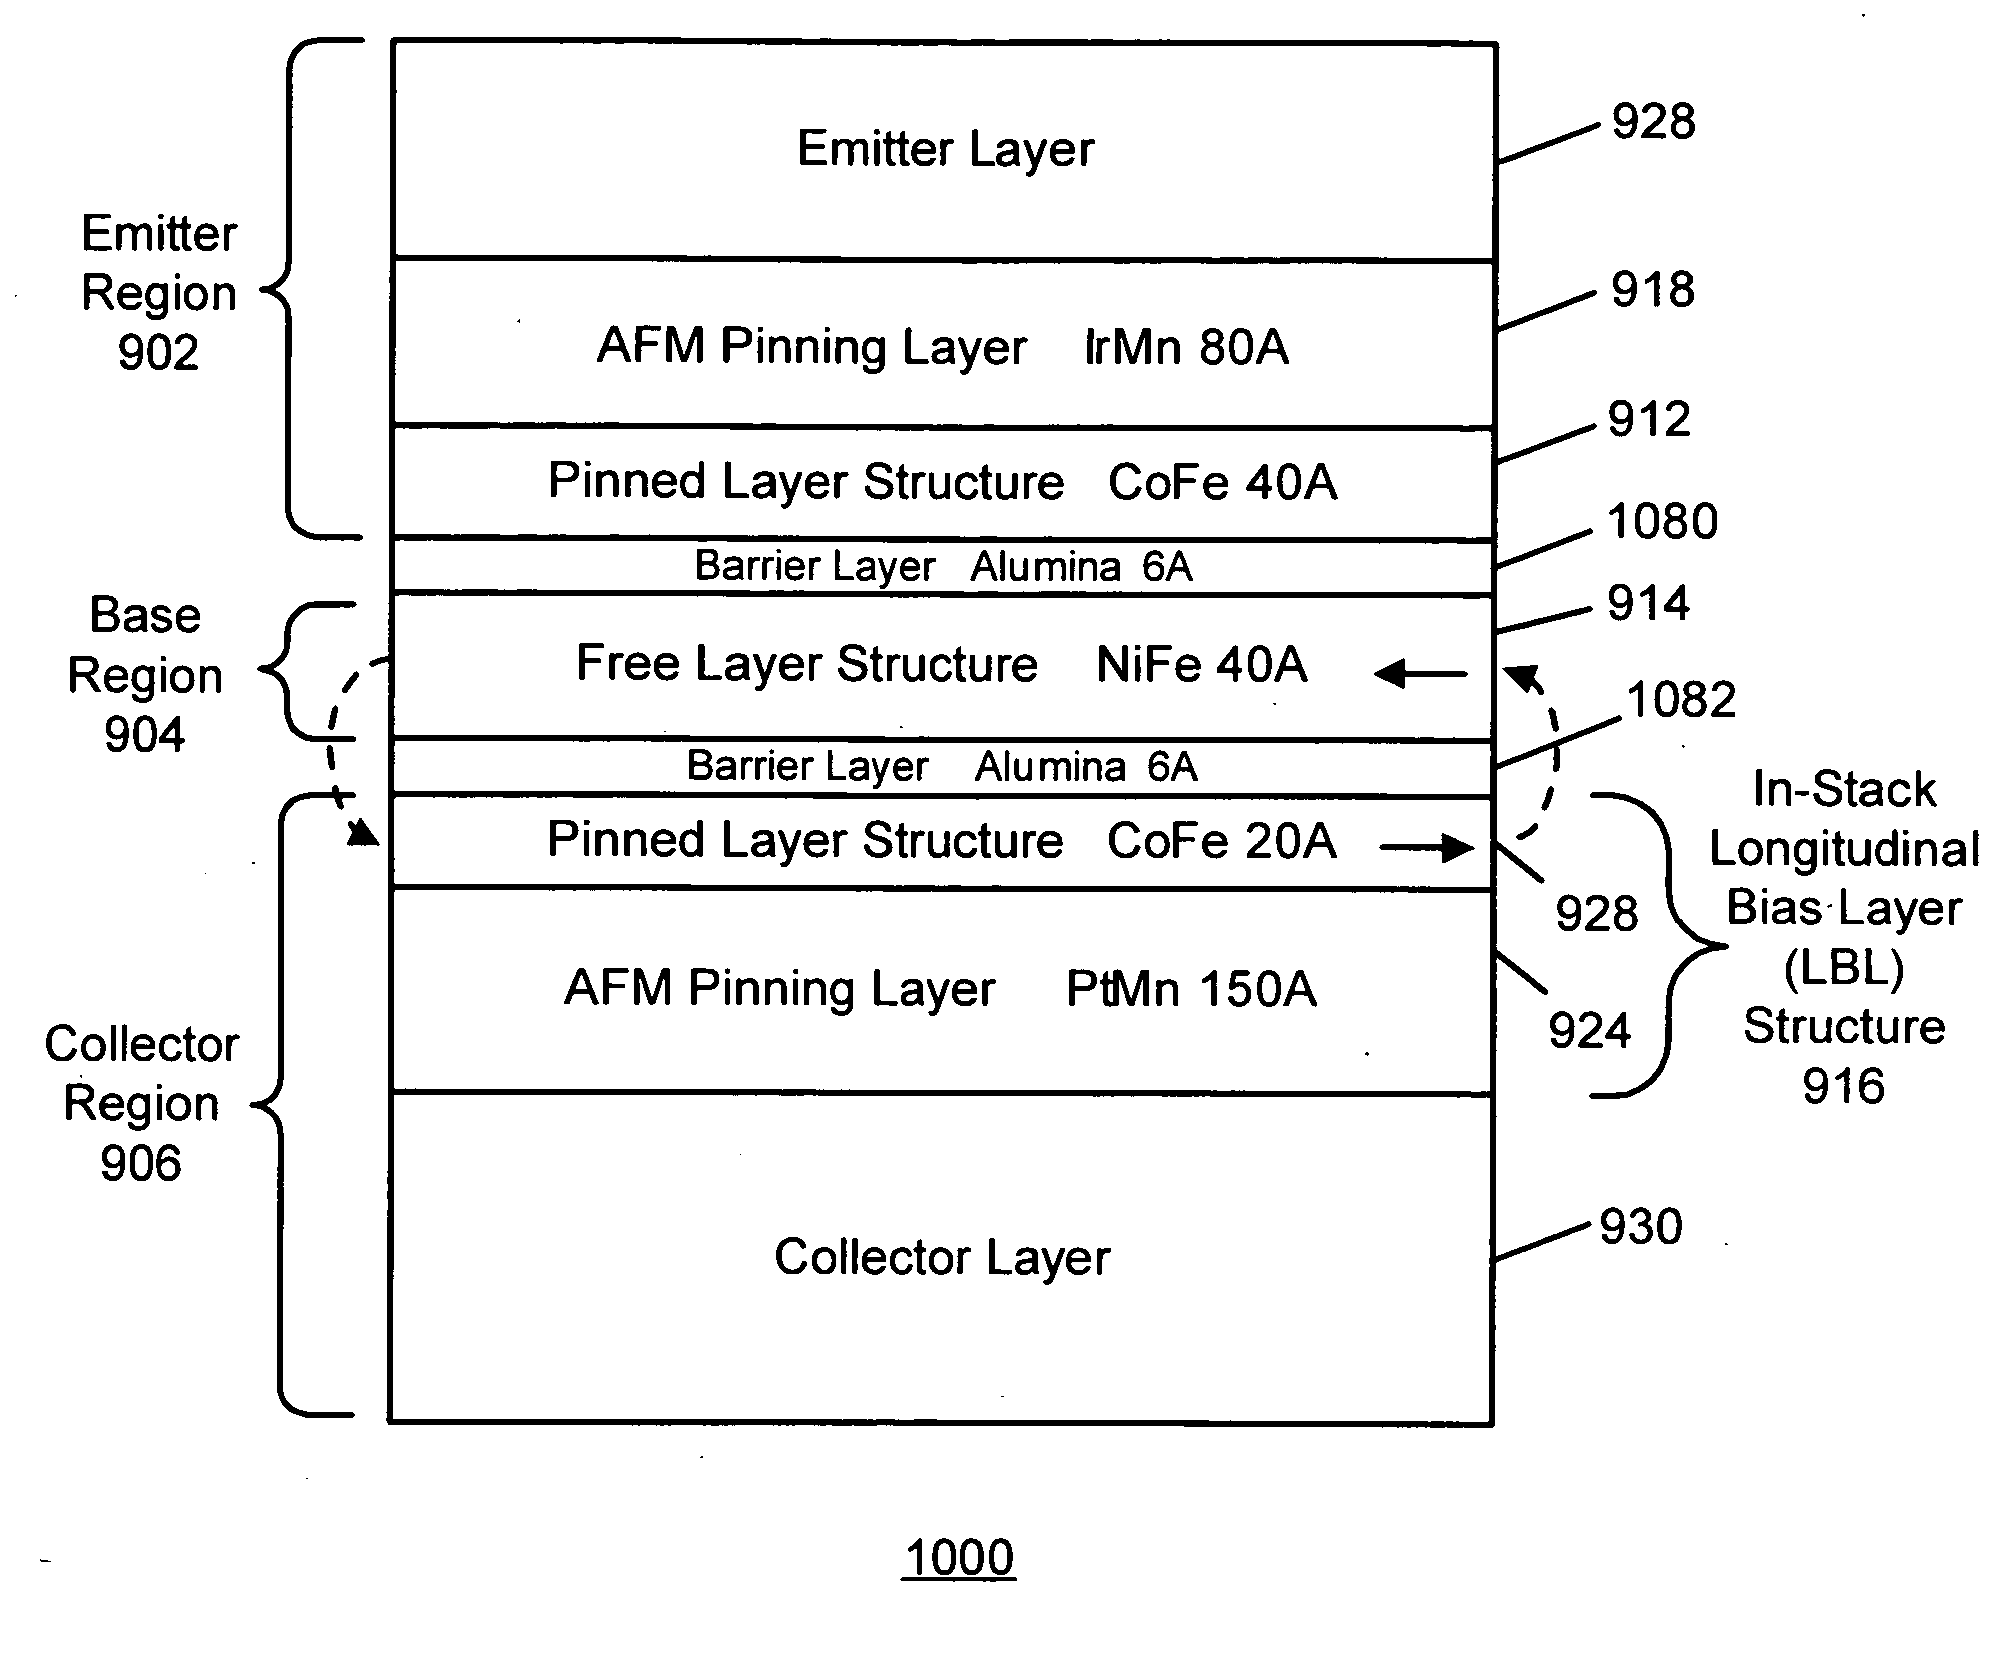 Three terminal magnetic sensor having an in-stack longitudinal biasing layer structure in the collector or emitter region